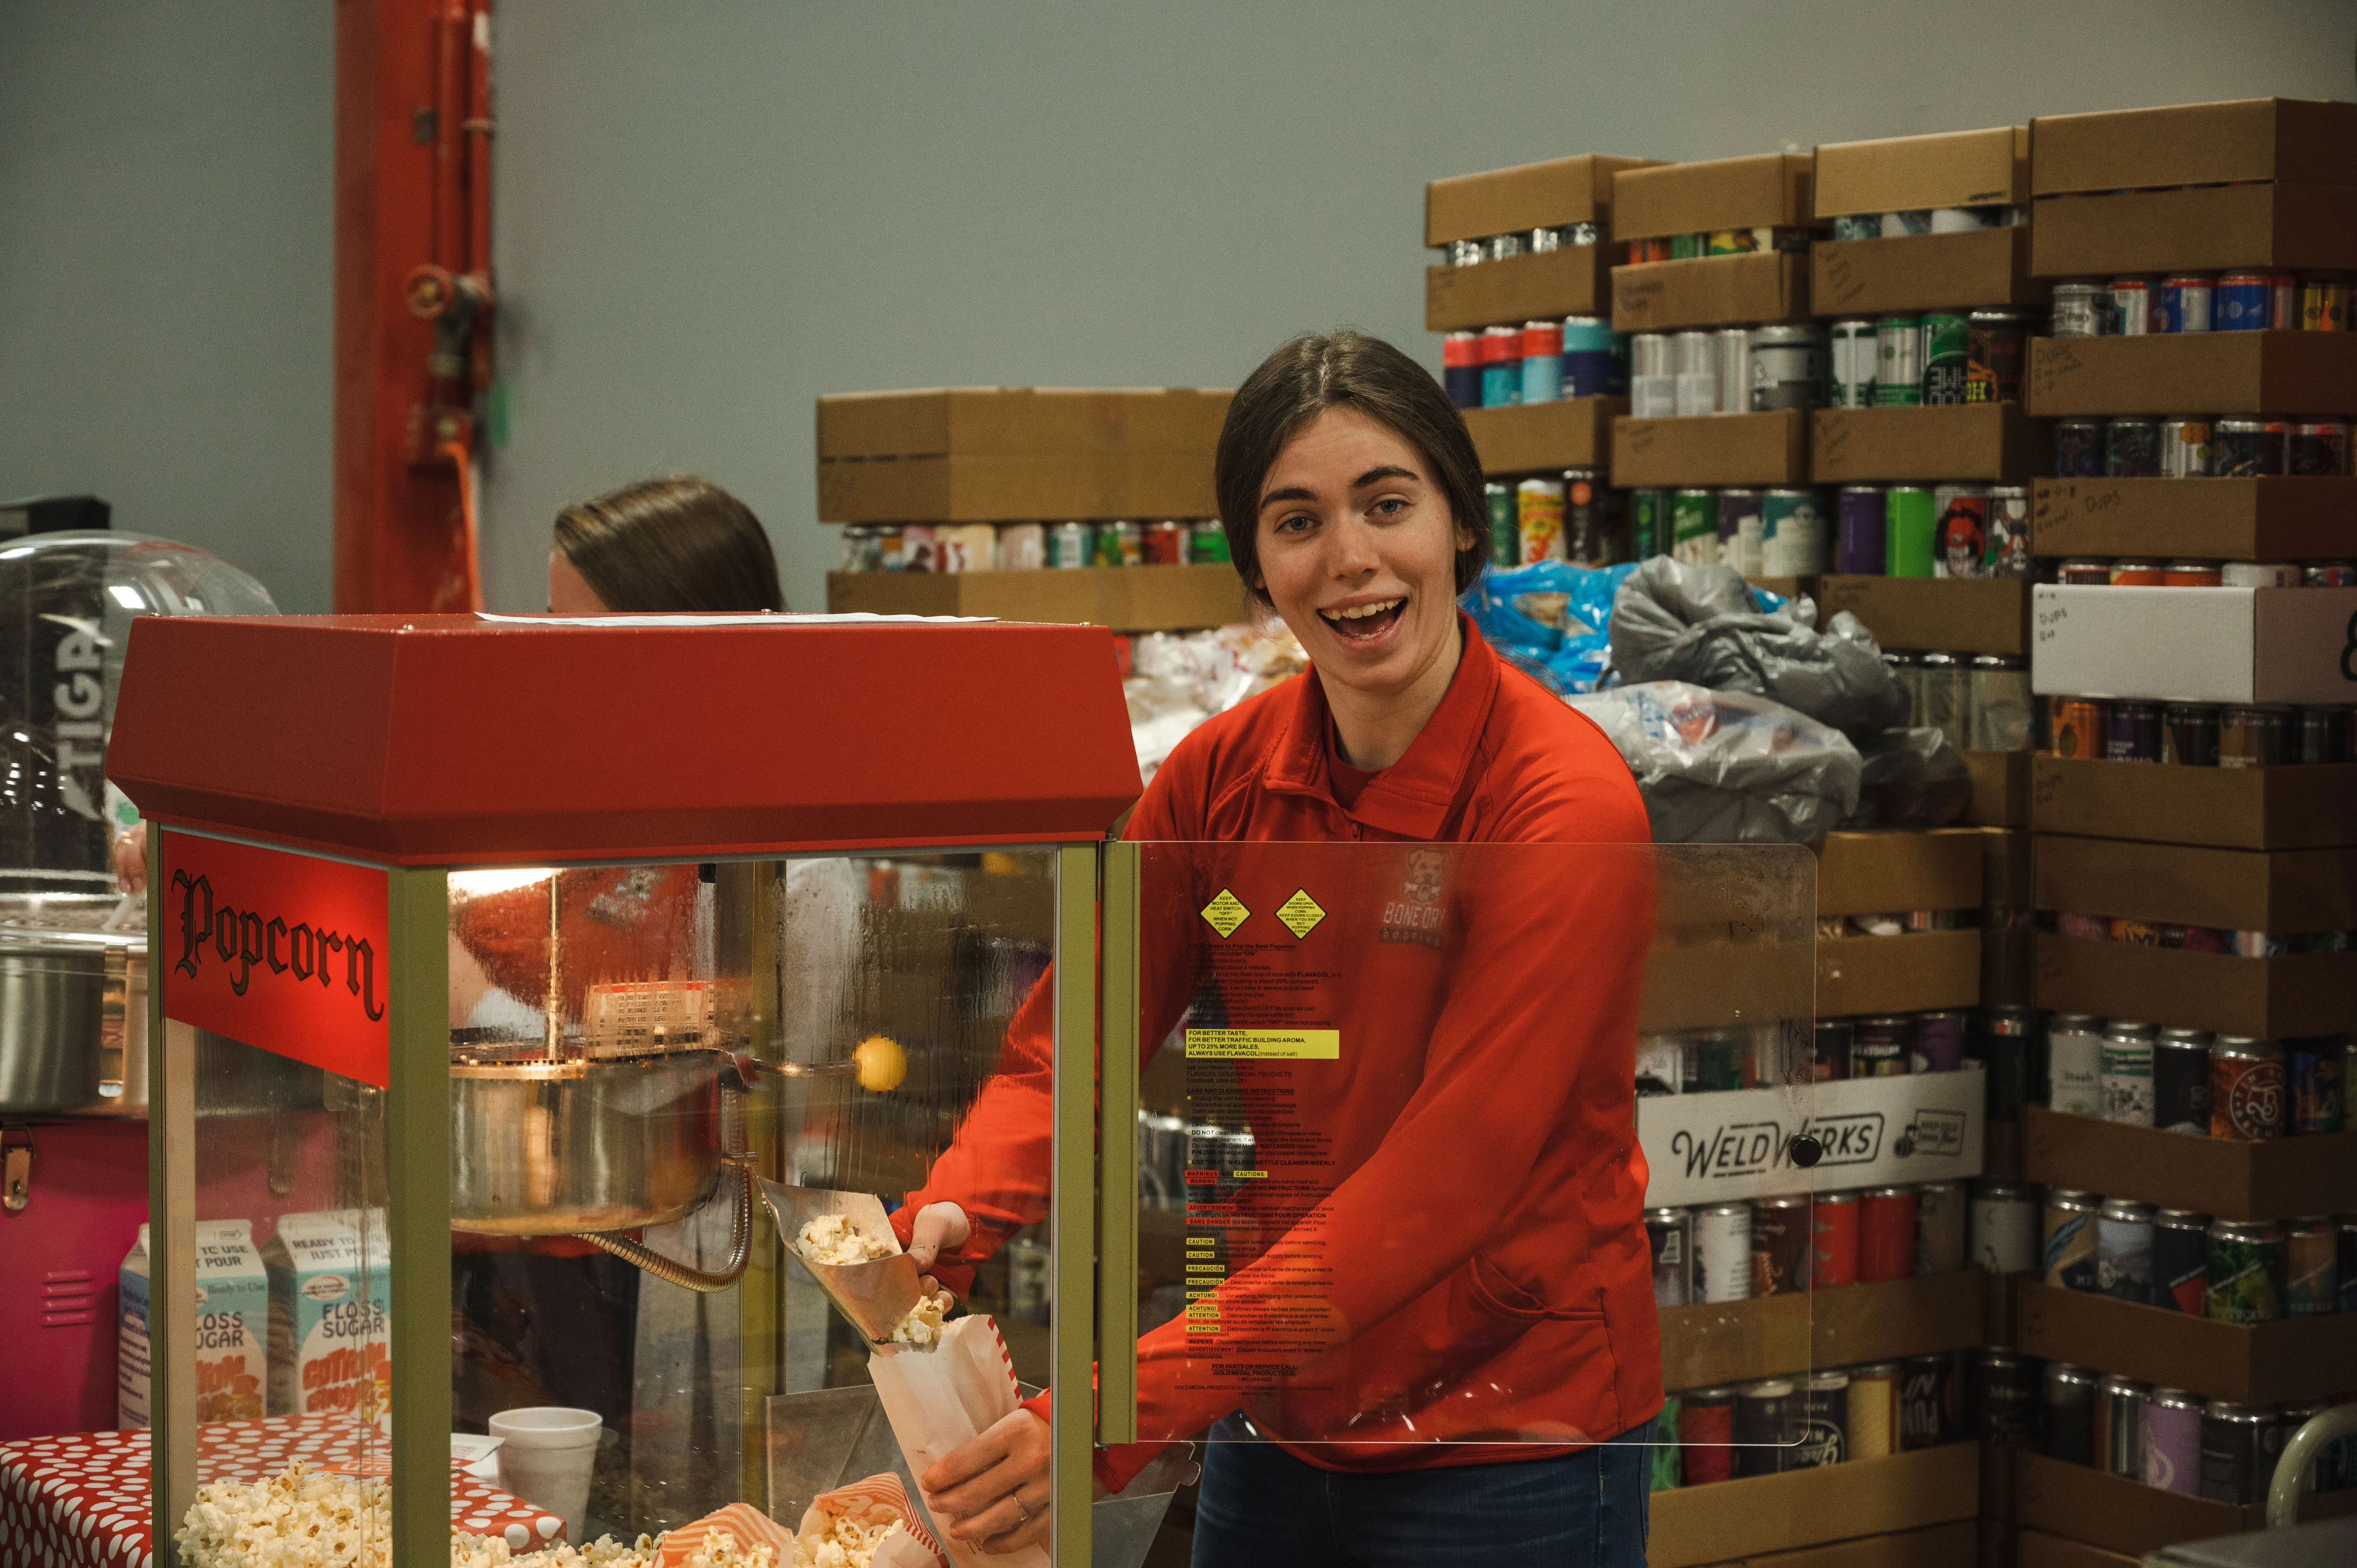 Worker smiling while standing behind a concession stand with popcorn and boxes in the background.